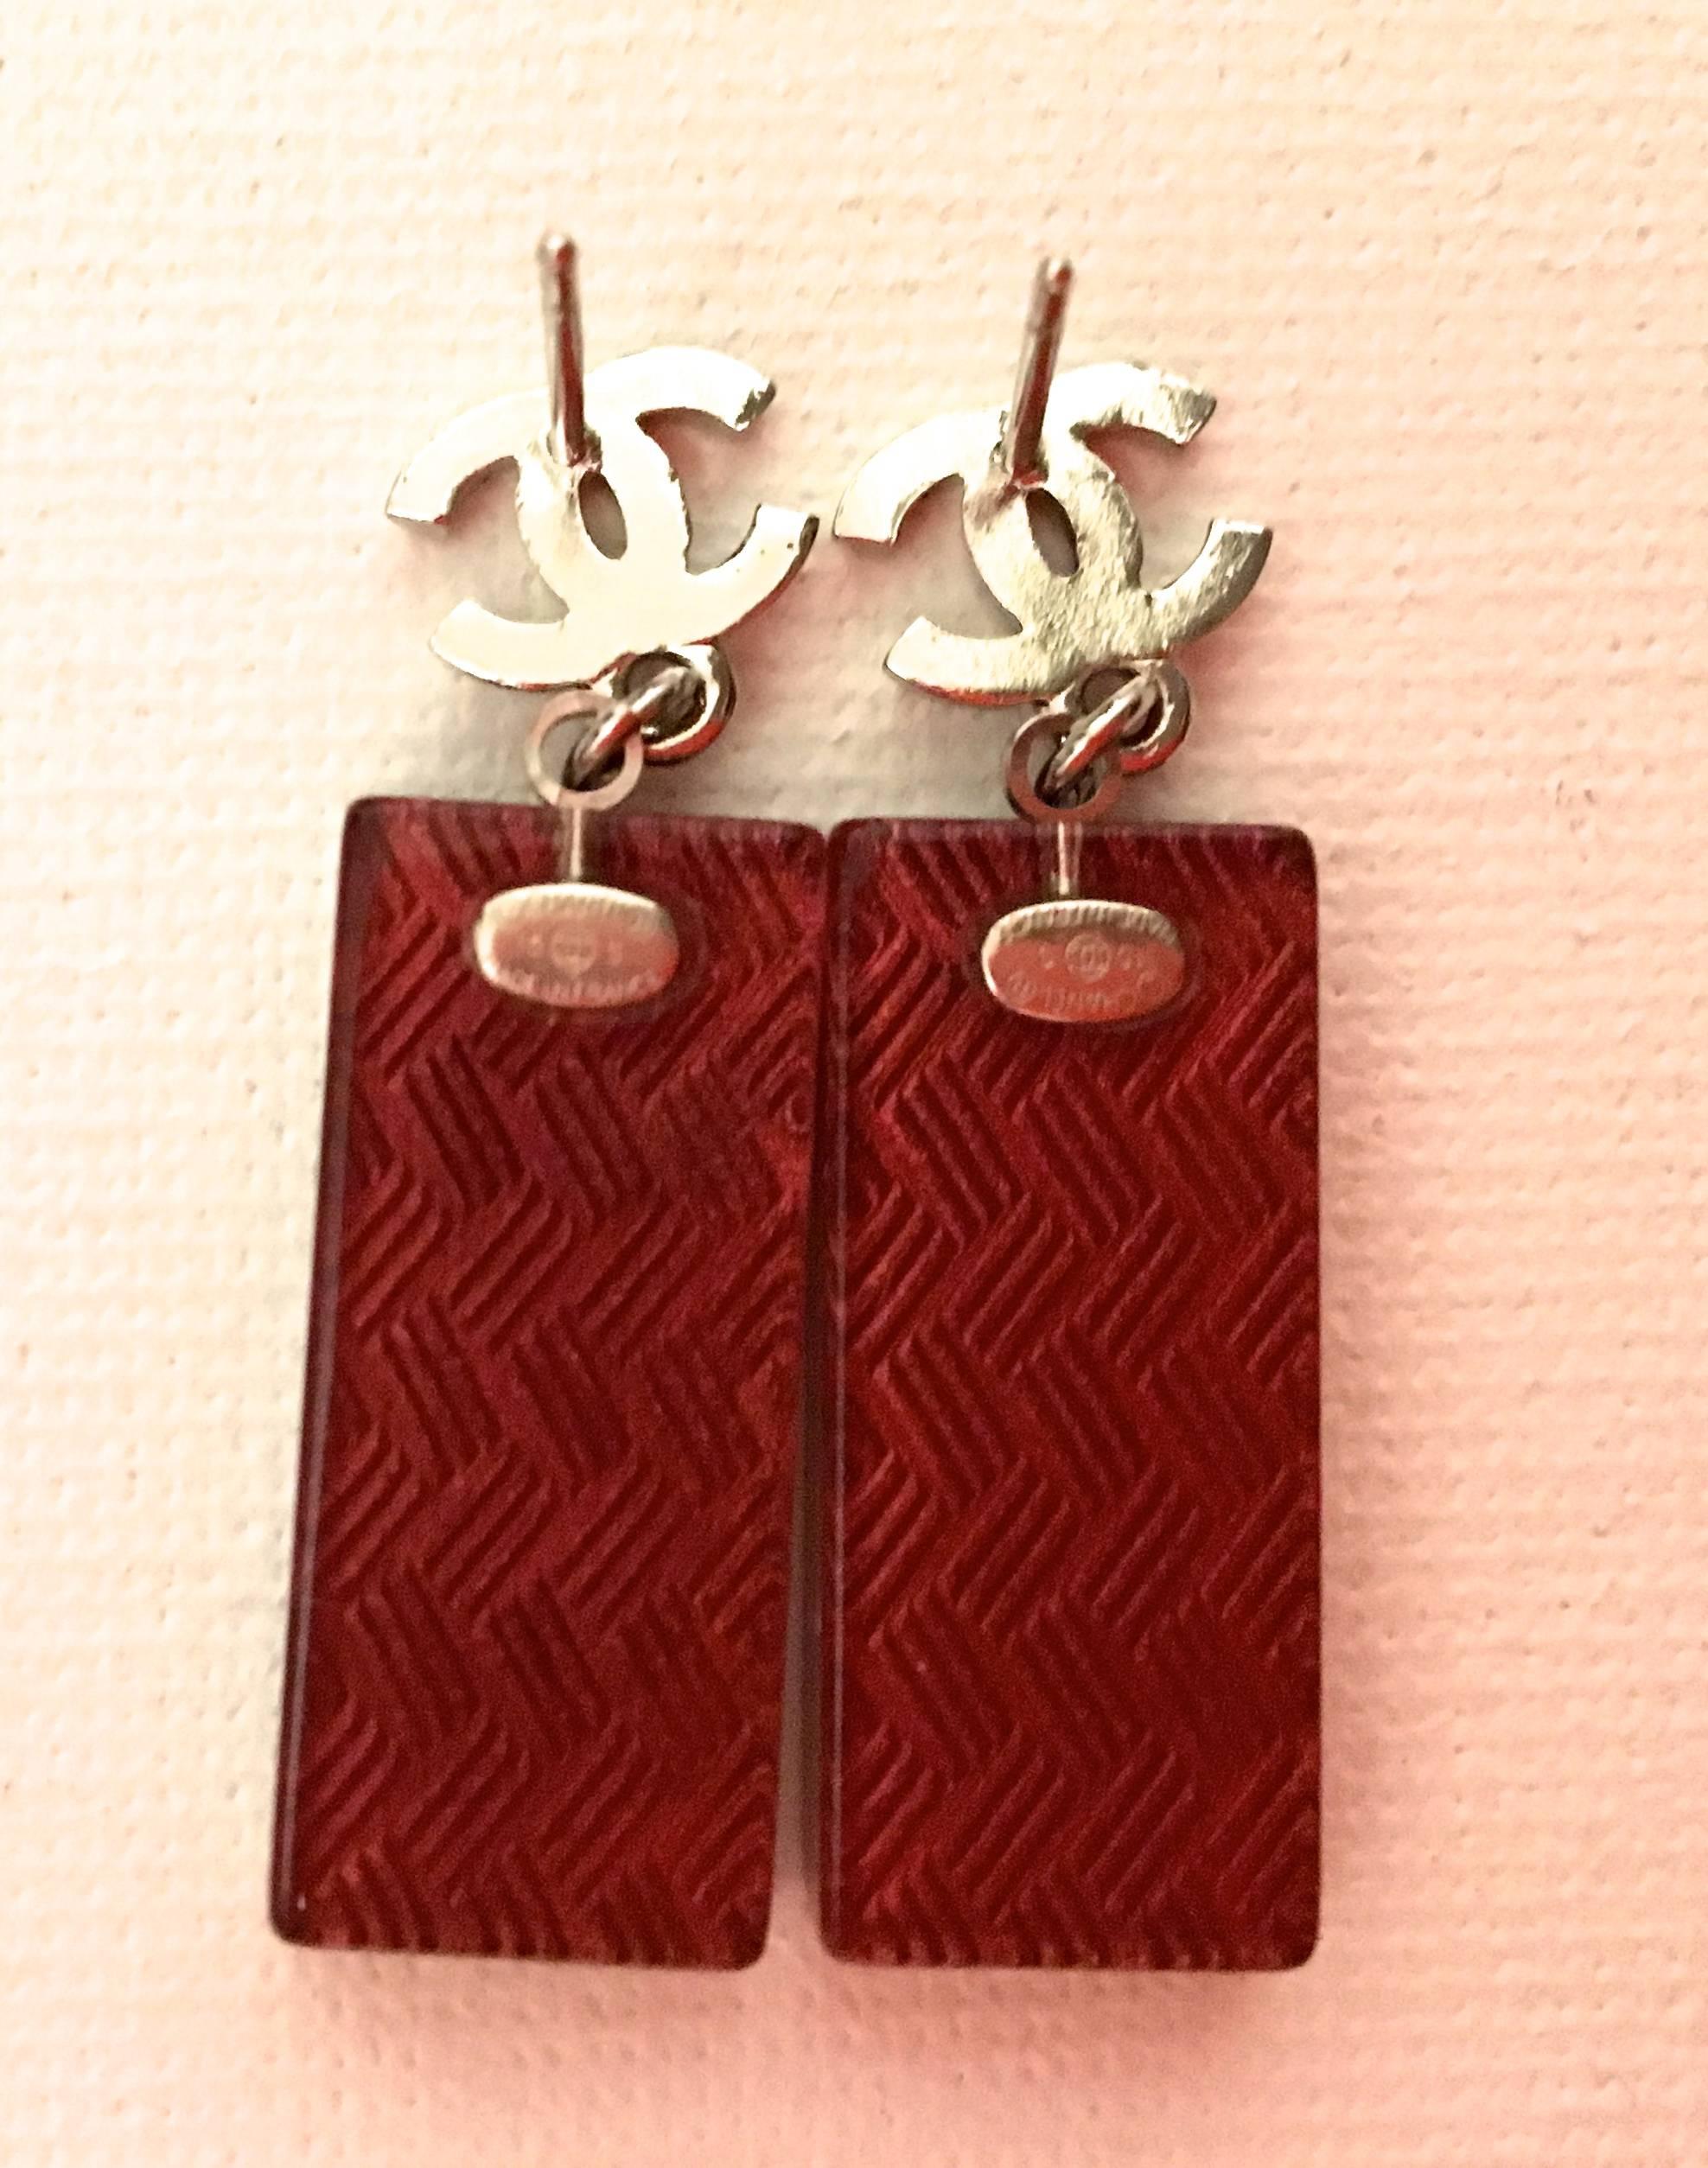 New Chanel Lucite Earrings - 'Votez Coco' - 2015 In New Condition For Sale In Boca Raton, FL